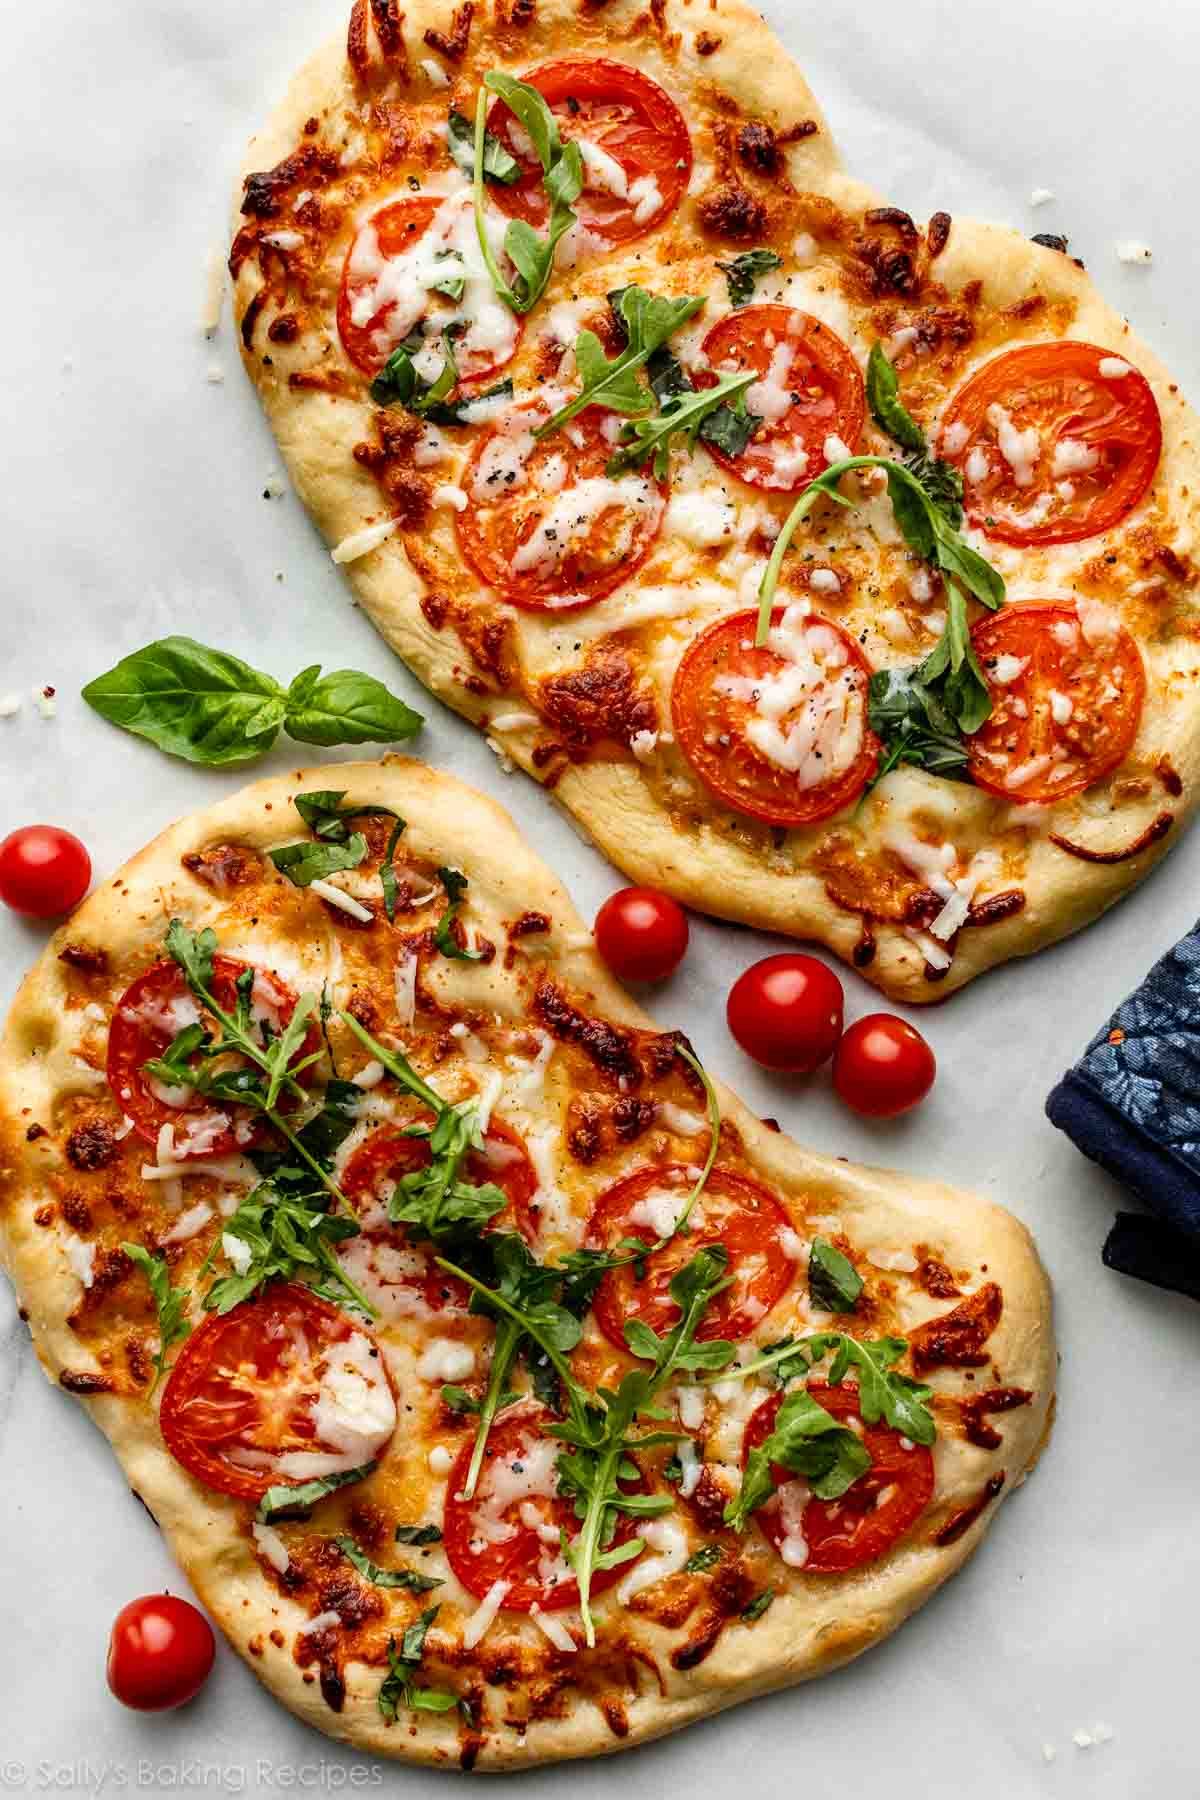 homemade flatbread pizza with mozzarella cheese, tomatoes, and arugula on top.